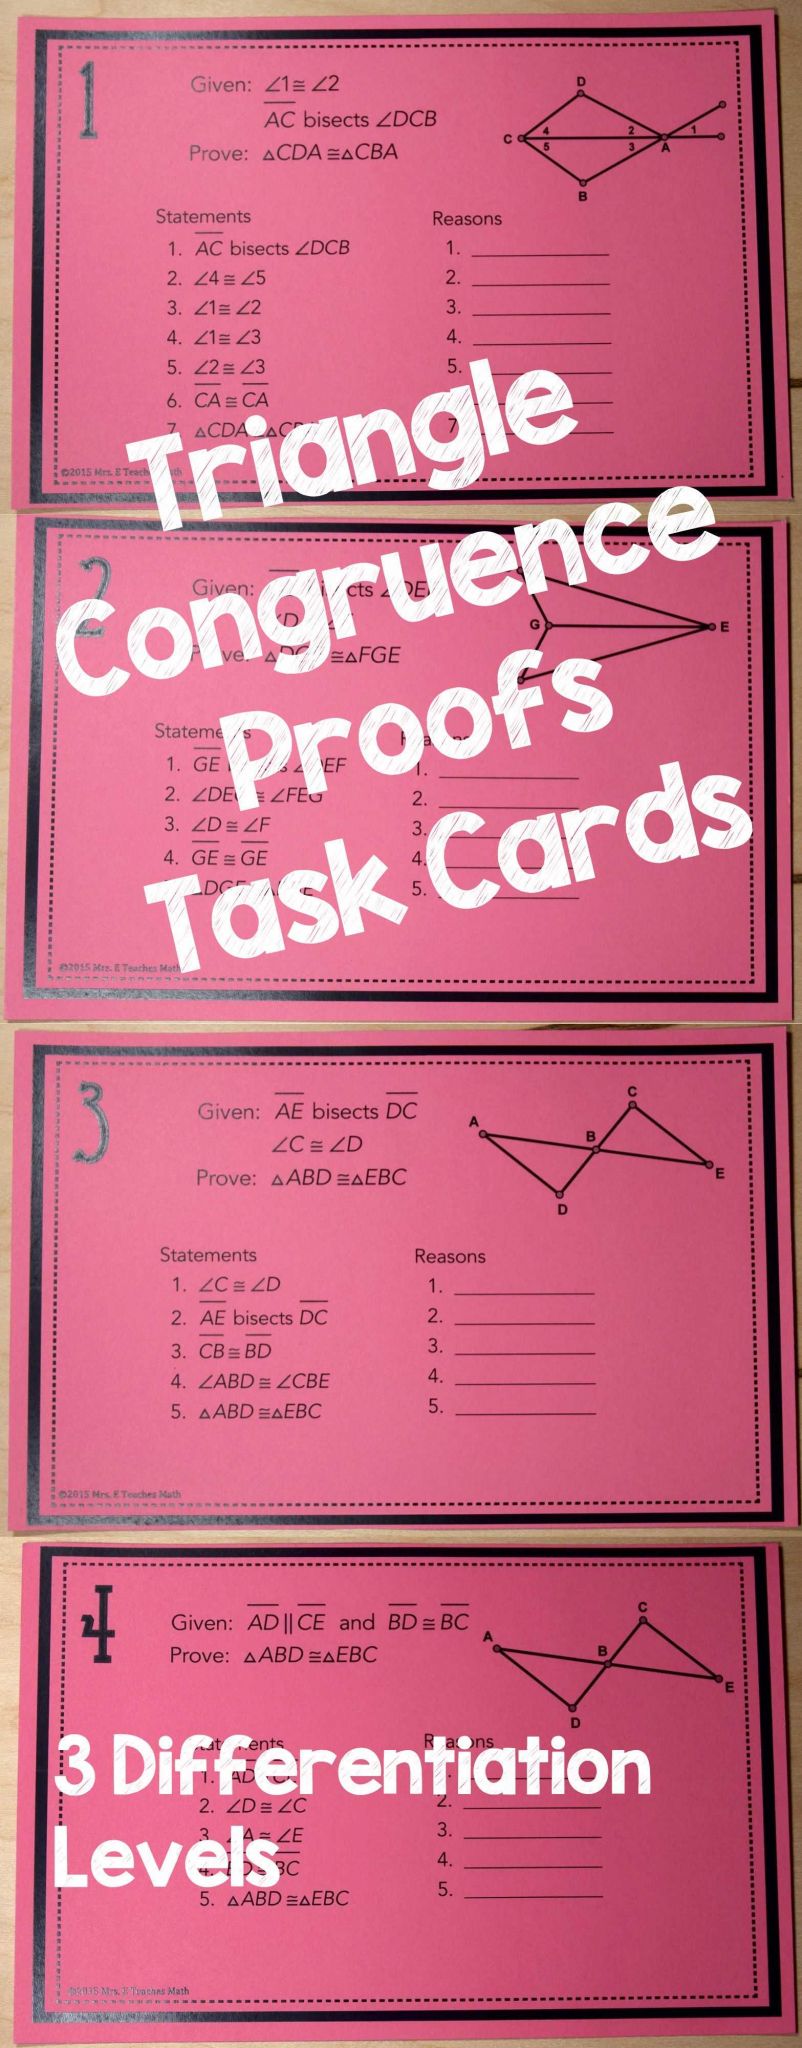 Medians and Centroids Worksheet Answers together with Congruent Triangles Proofs Task Cards